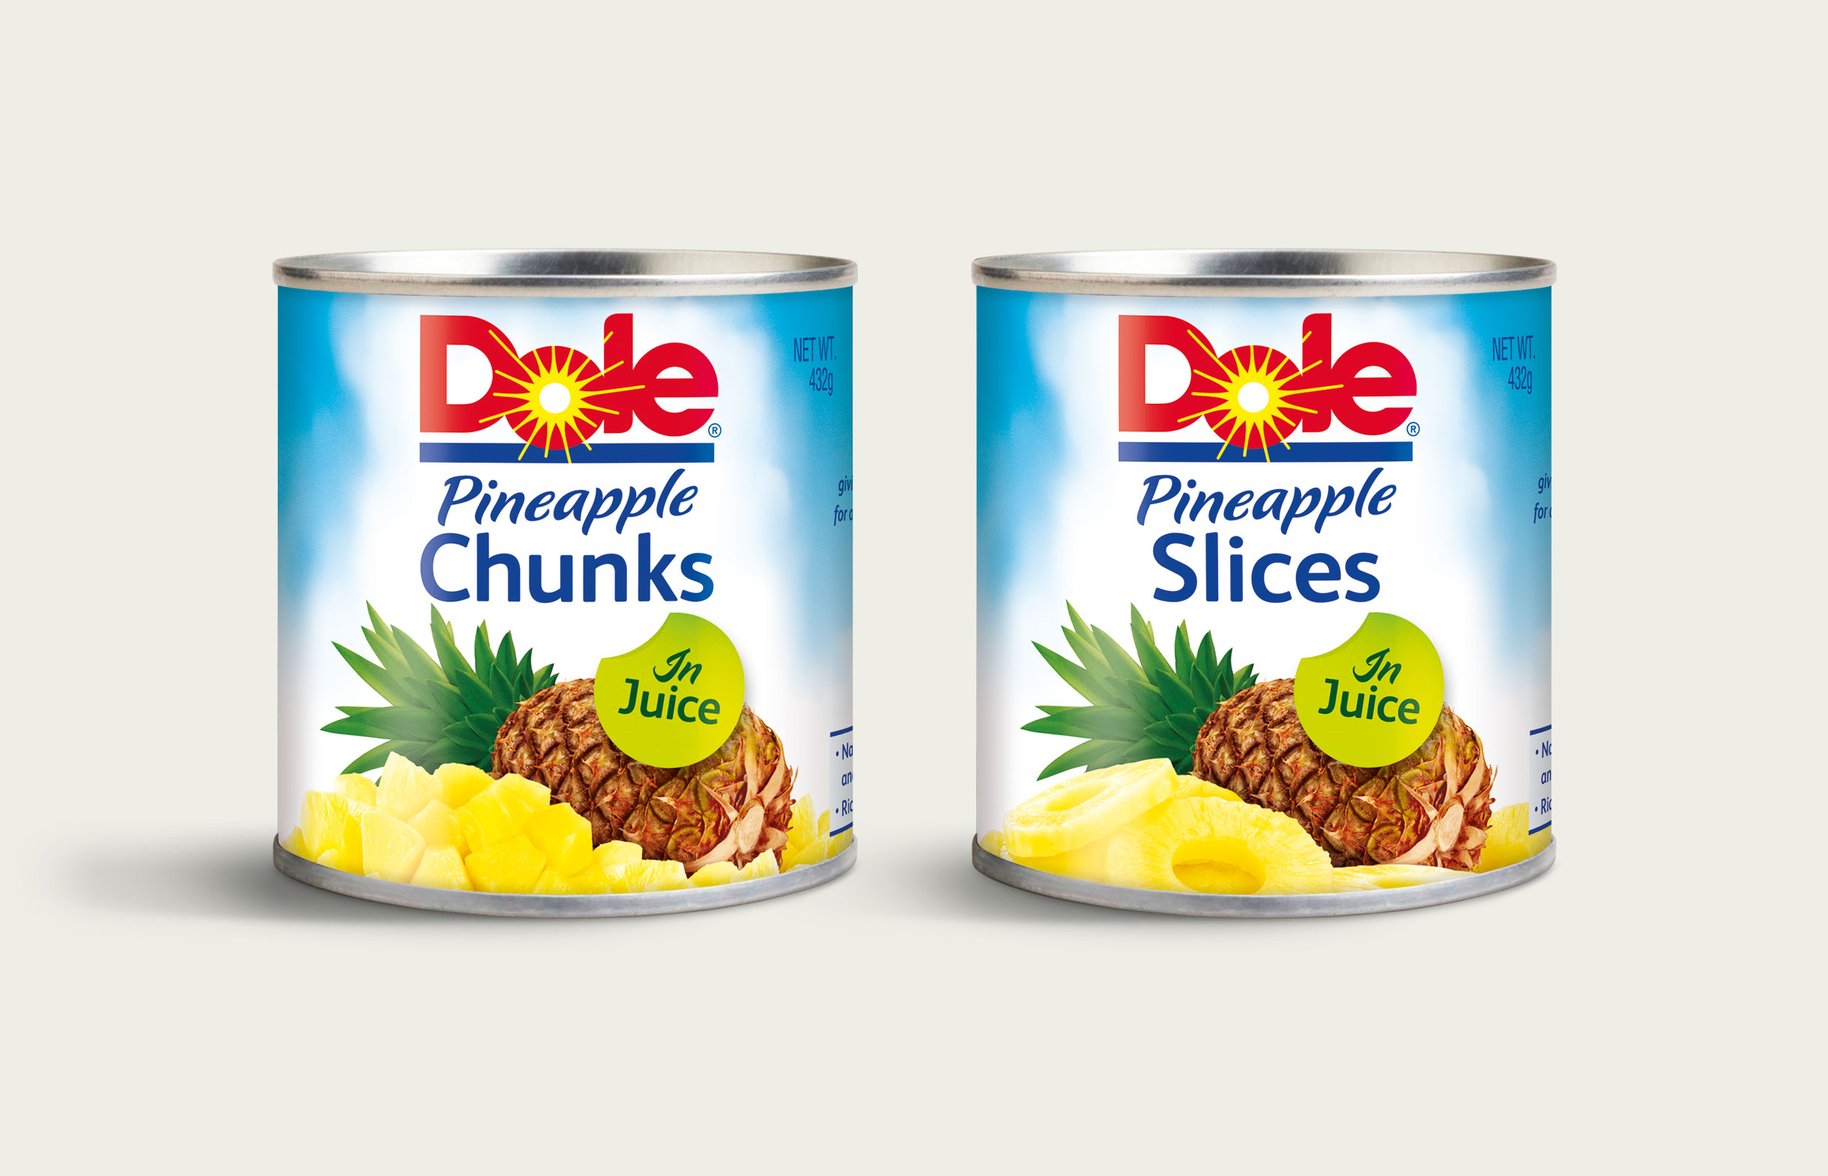 Dole Pineapple Packaging Design before